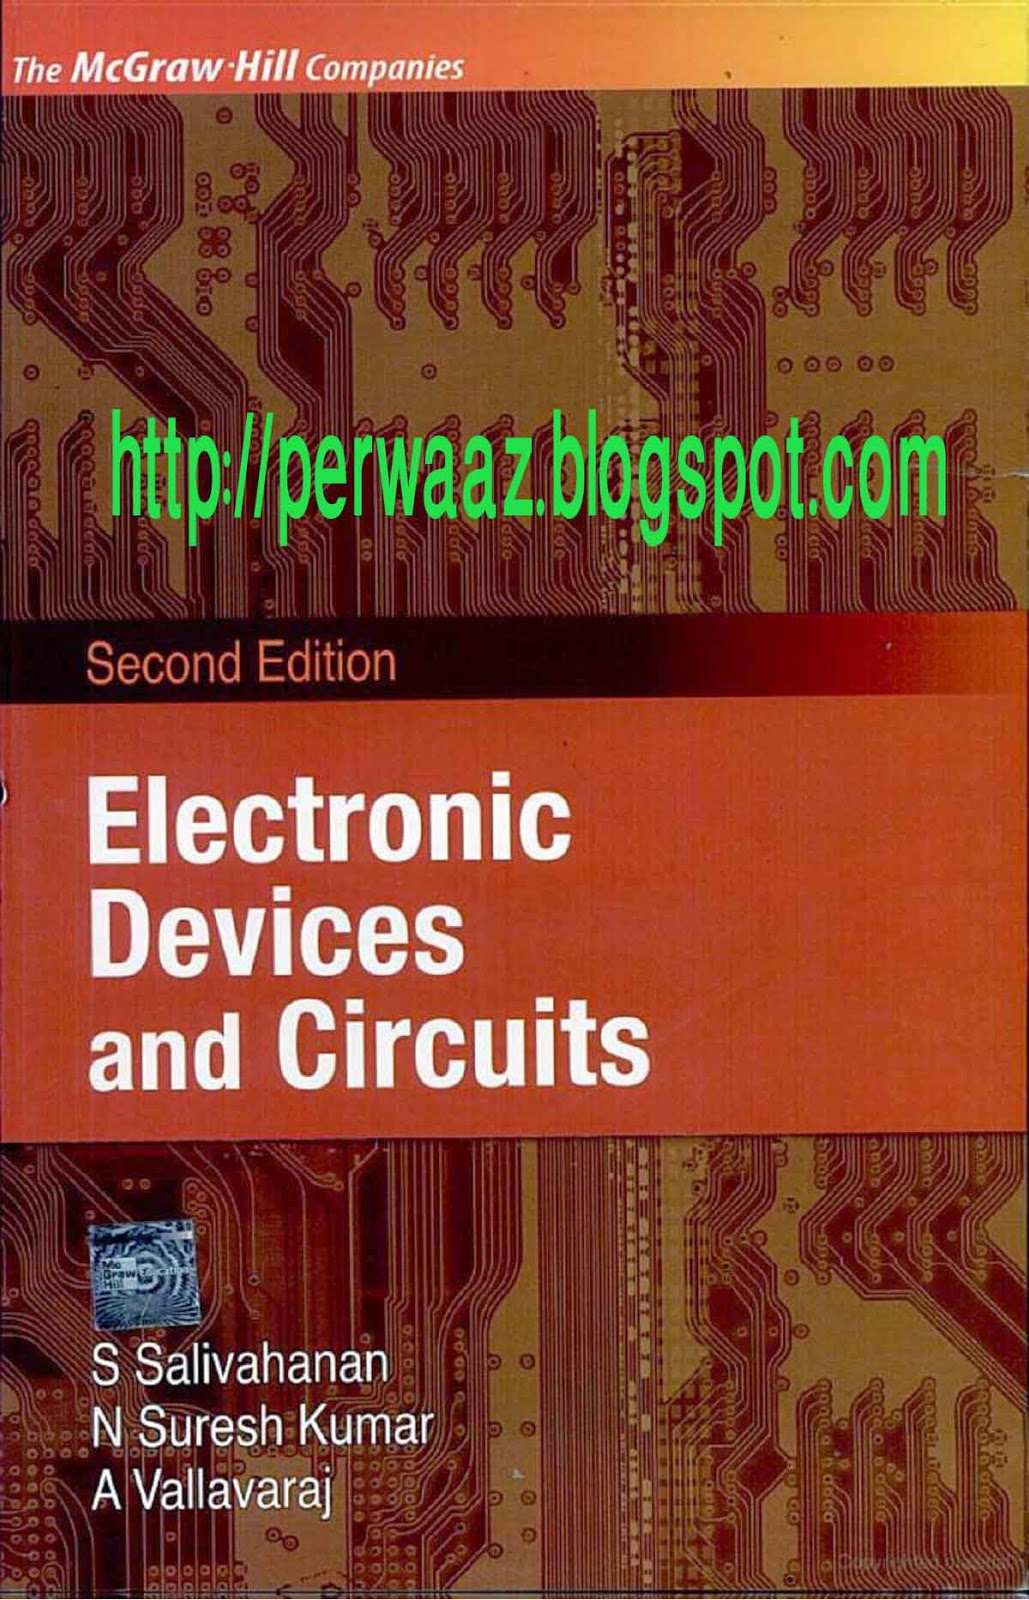 Electronic Devices and Circuits Second Edition S Salivanan, N Suresh Kumar, A Vallavaraj